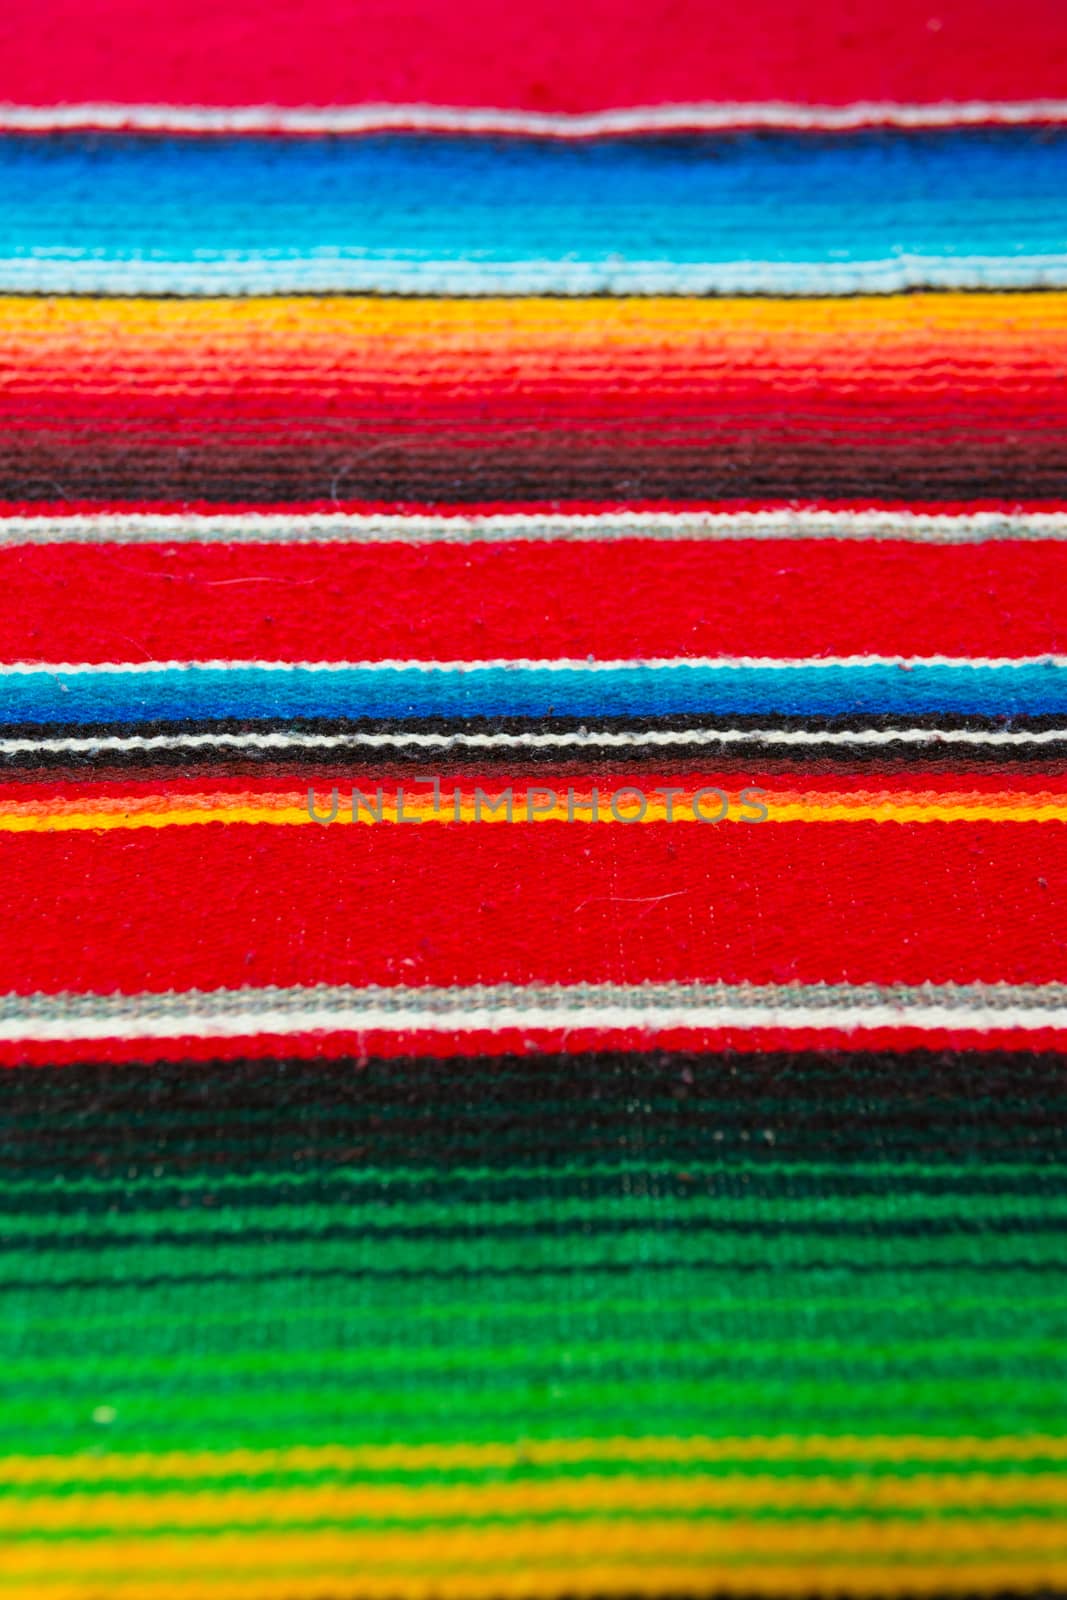 Colorful Mexican Poncho Background